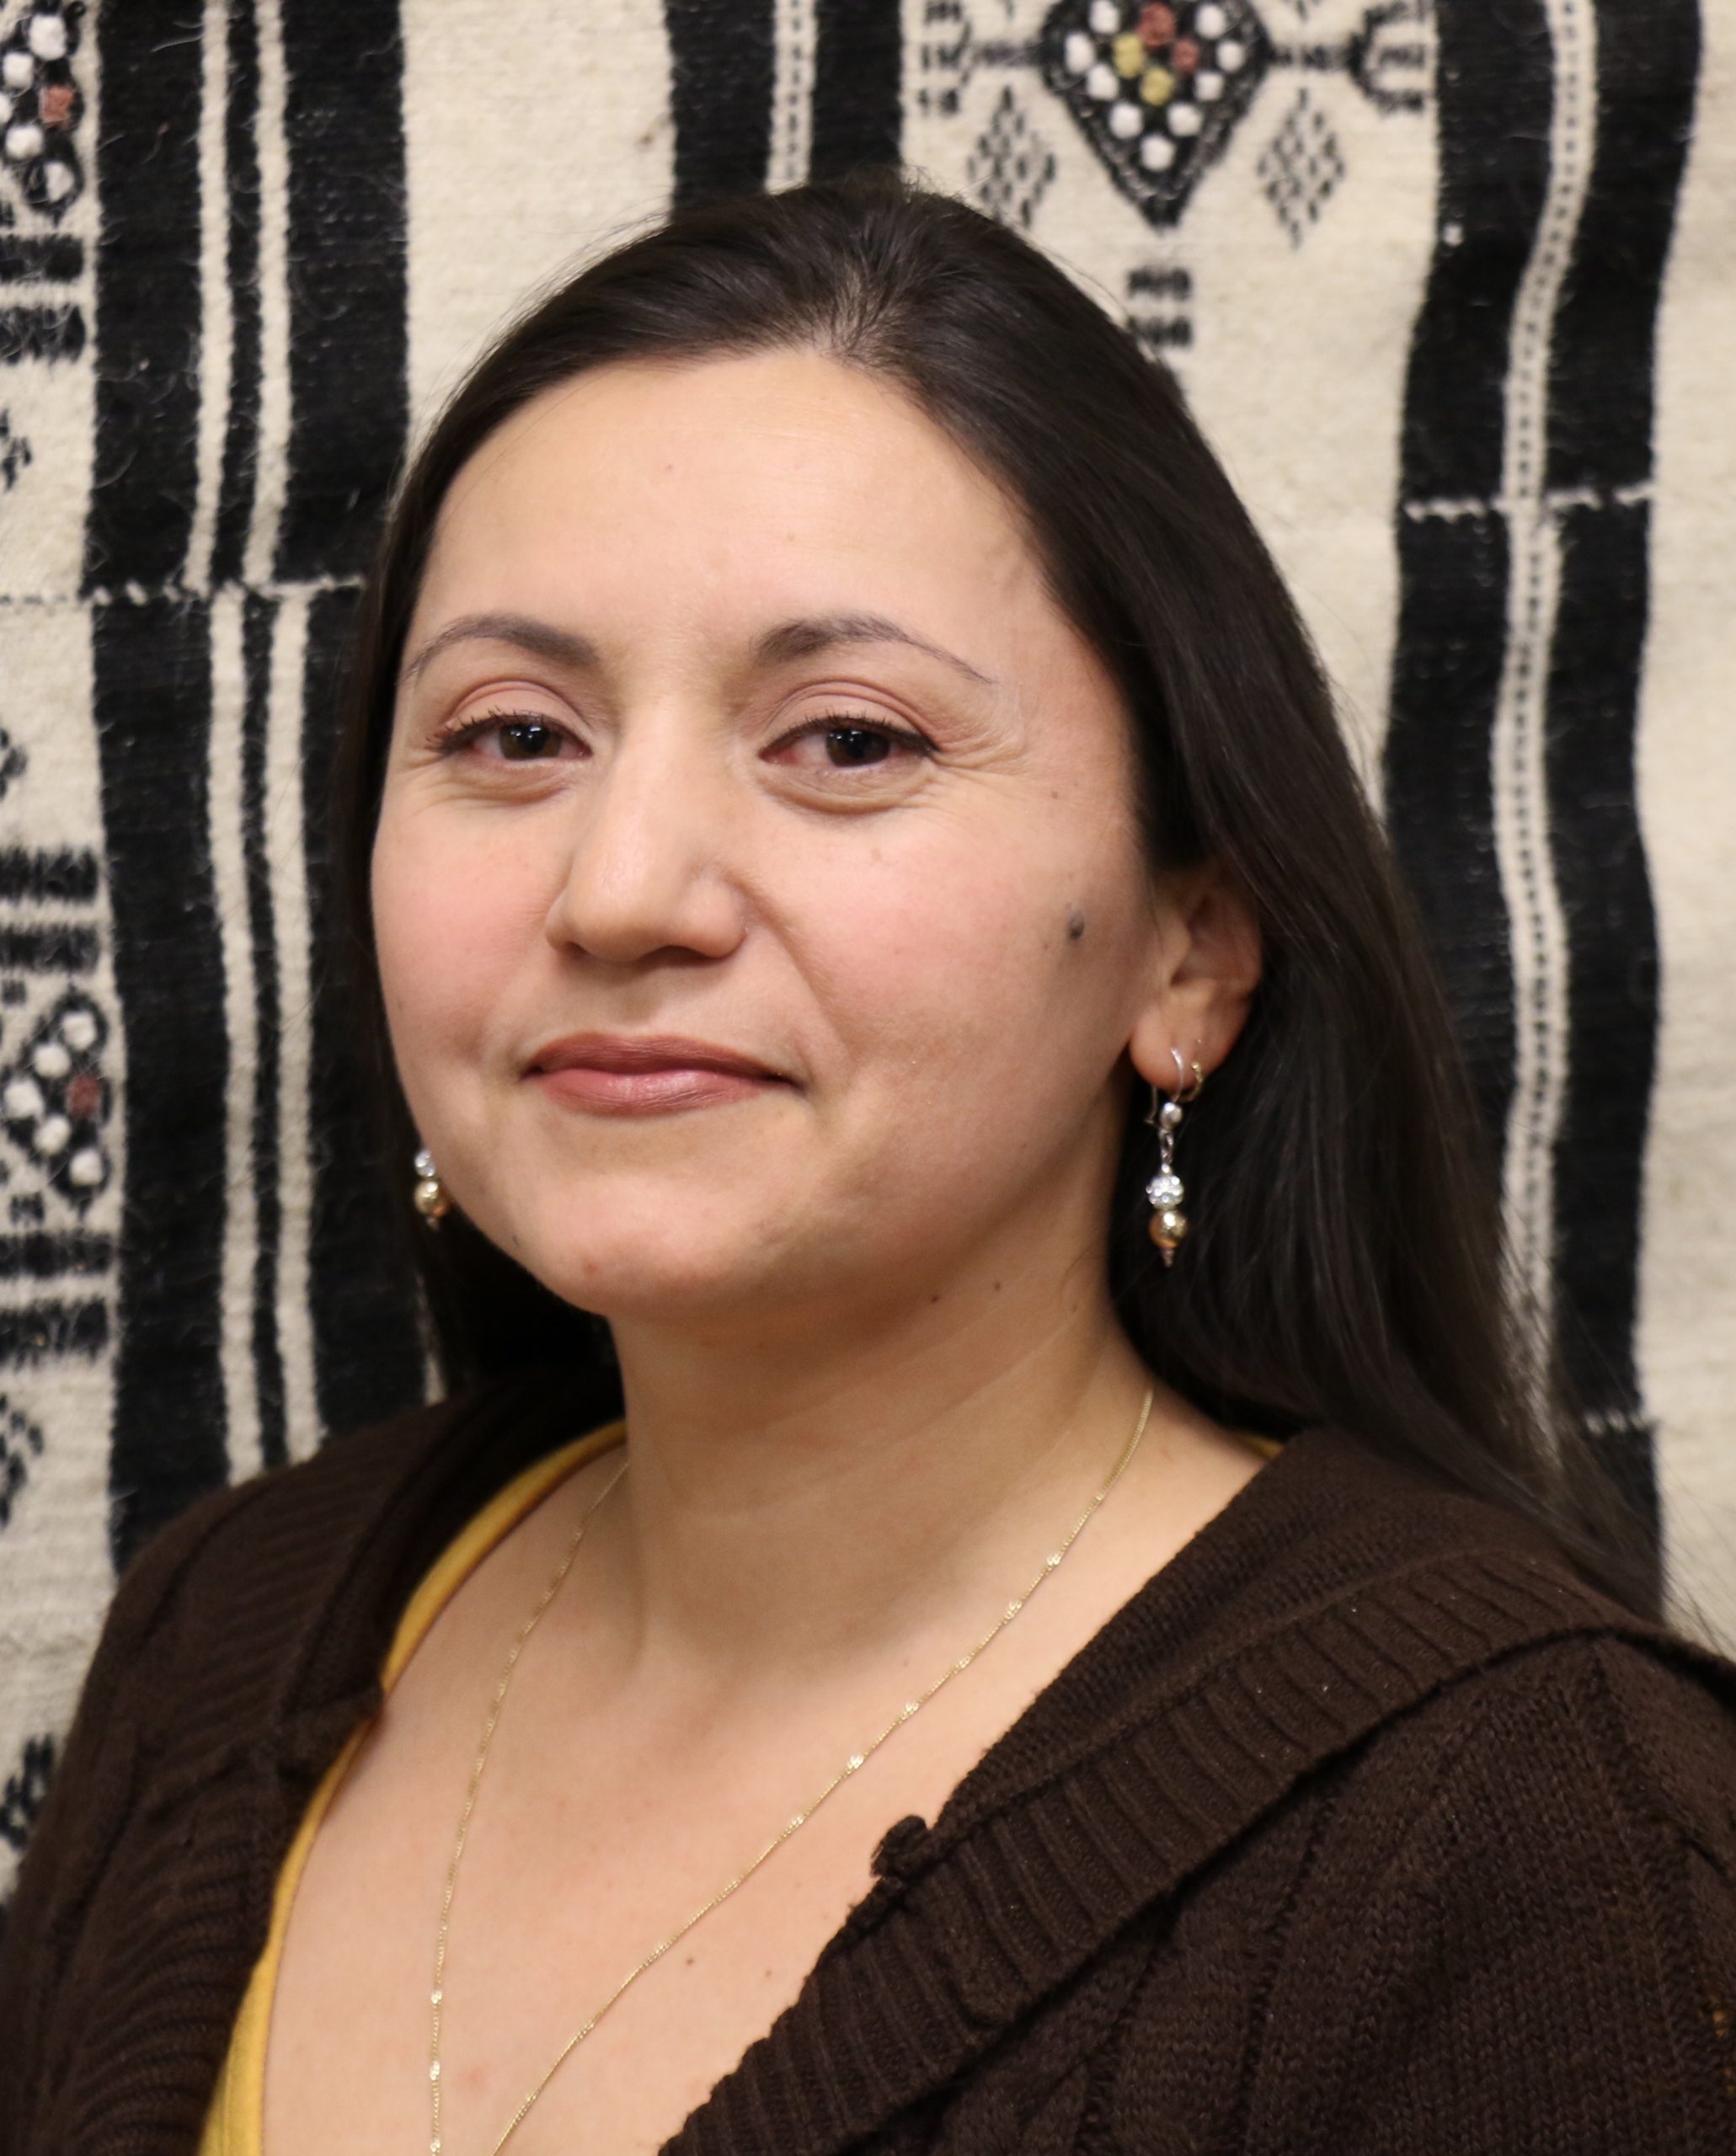 Hilda is a Colombian woman with long dark hair and brown eyes. She is wearing a brown sweater and earrings. She is standing in front of a black and white tapestry.